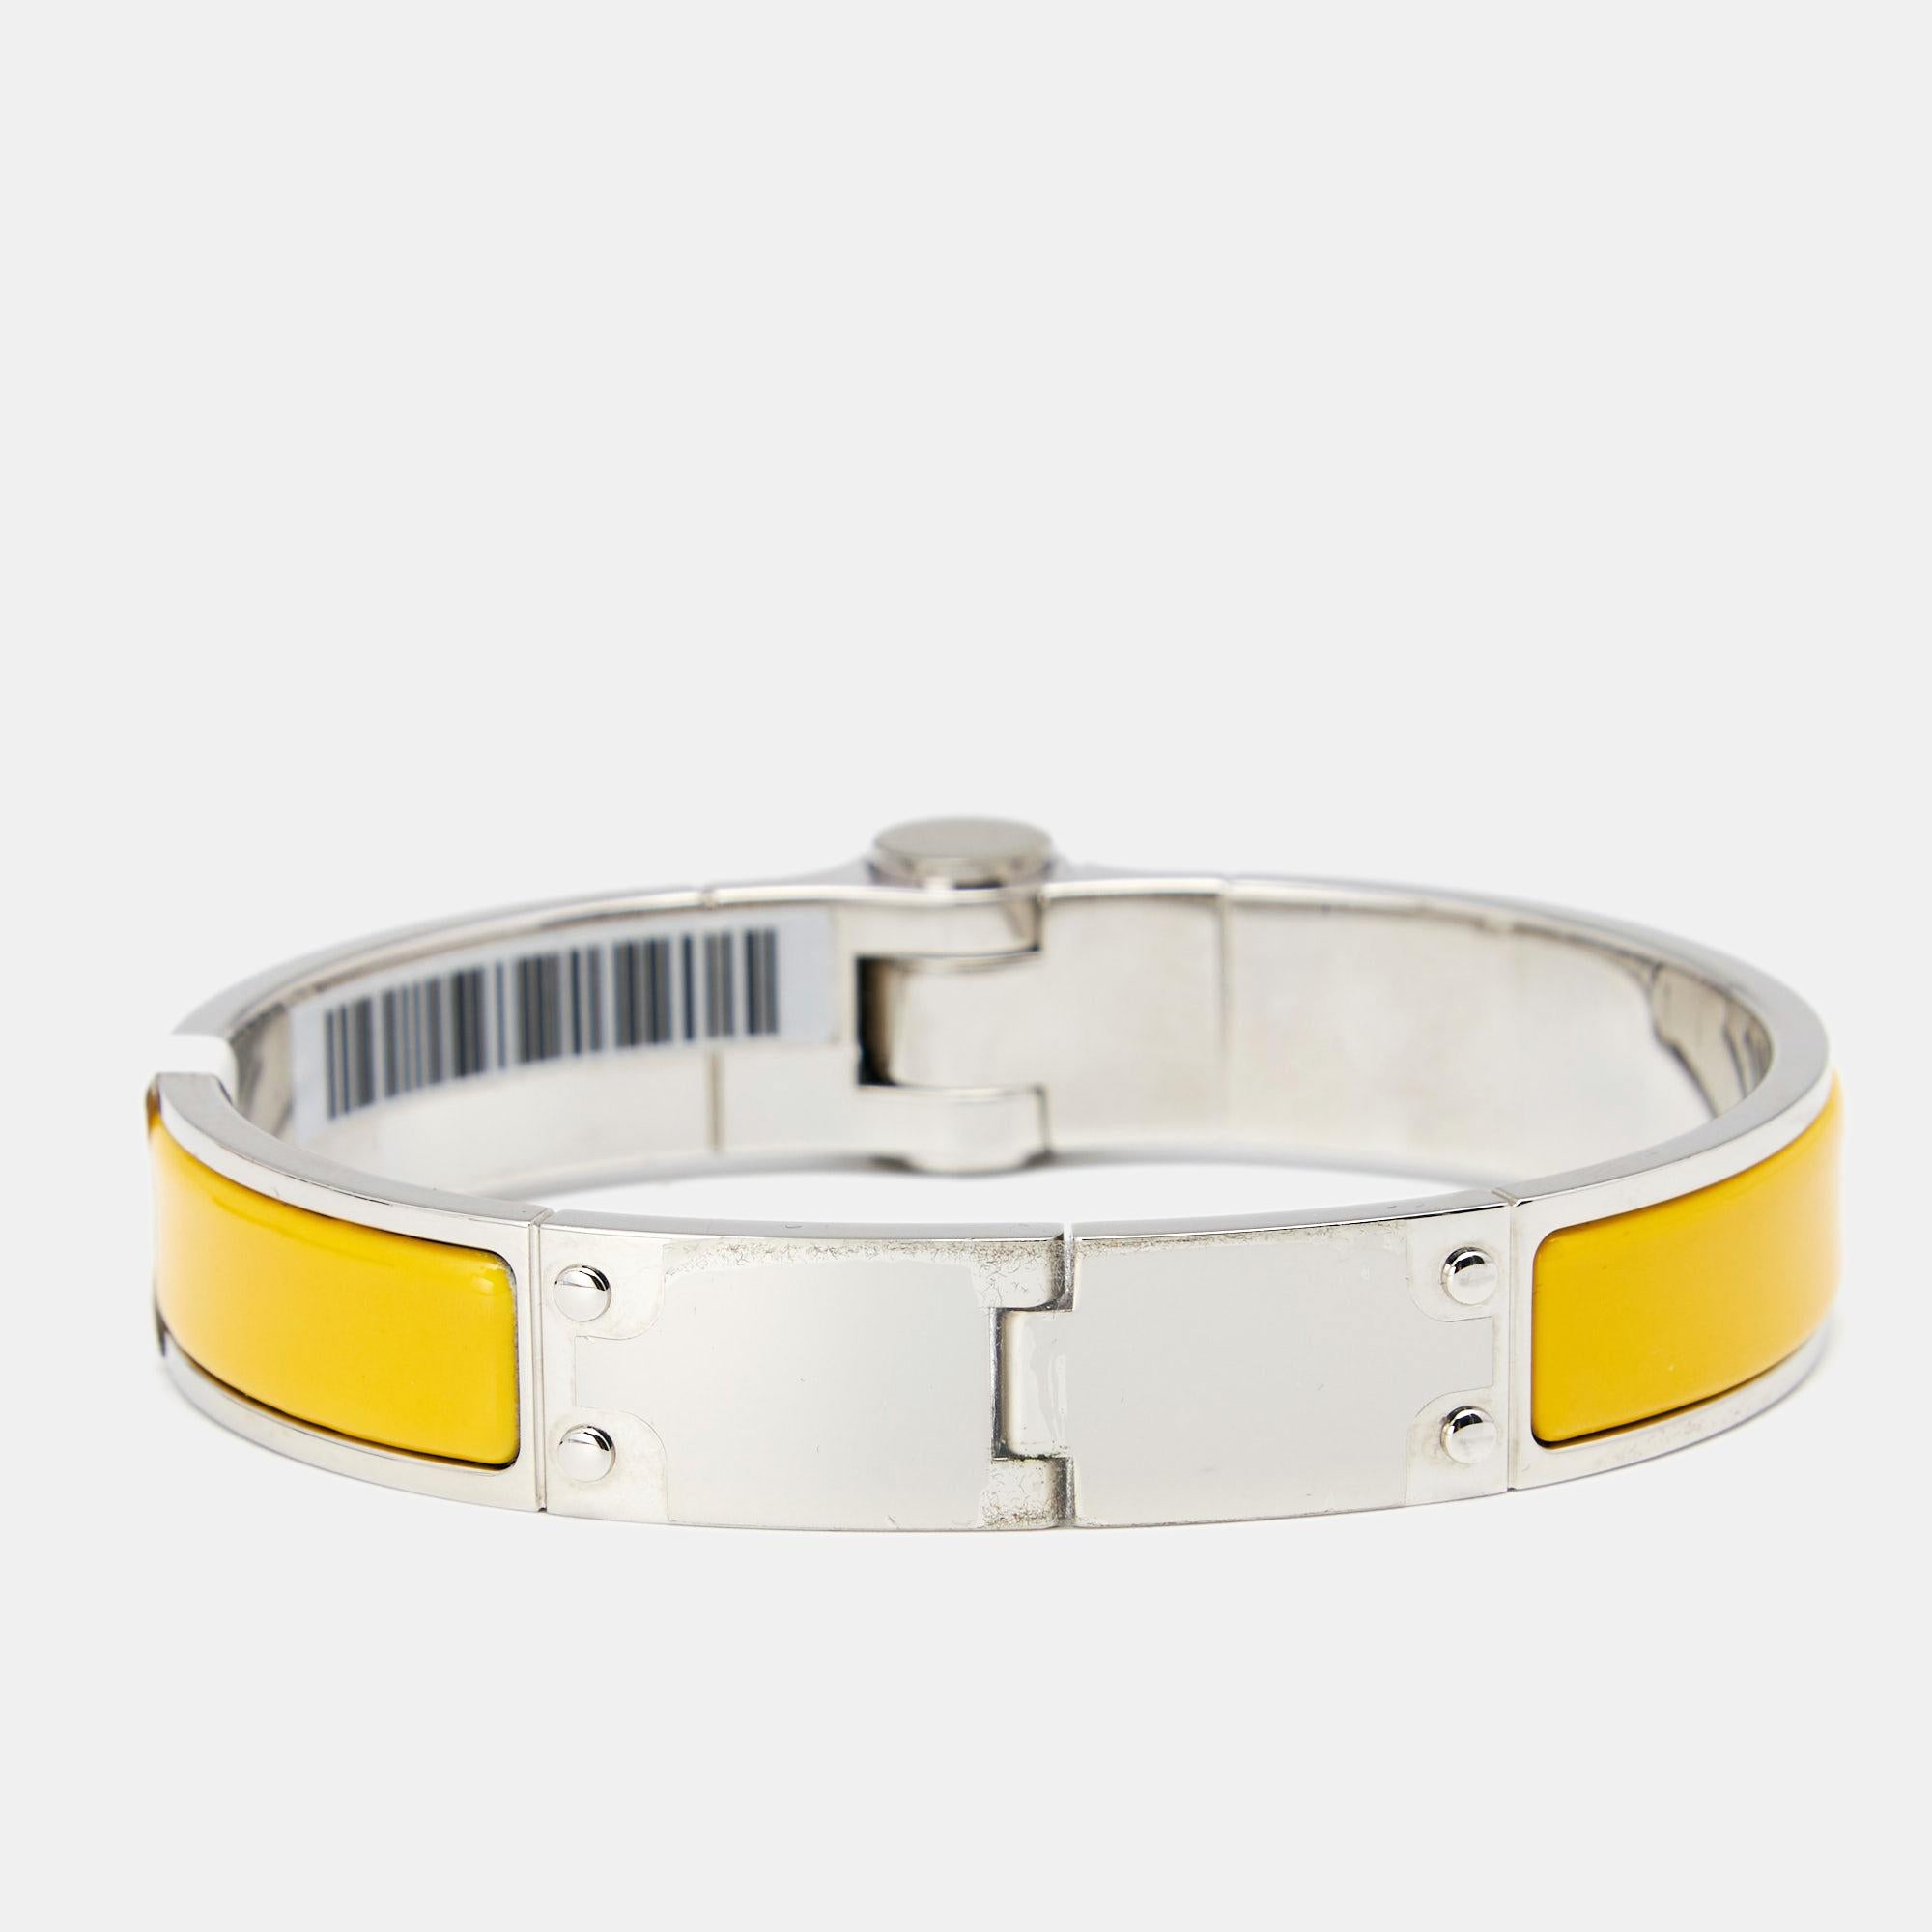 Hermès Charniere Uni bracelet is designed from a gold-plated body and features a slender silhouette. It is coated with yellow enamel and is complete with a push-clasp closure. You can easily dress up or down with this simple accessory. Styled with